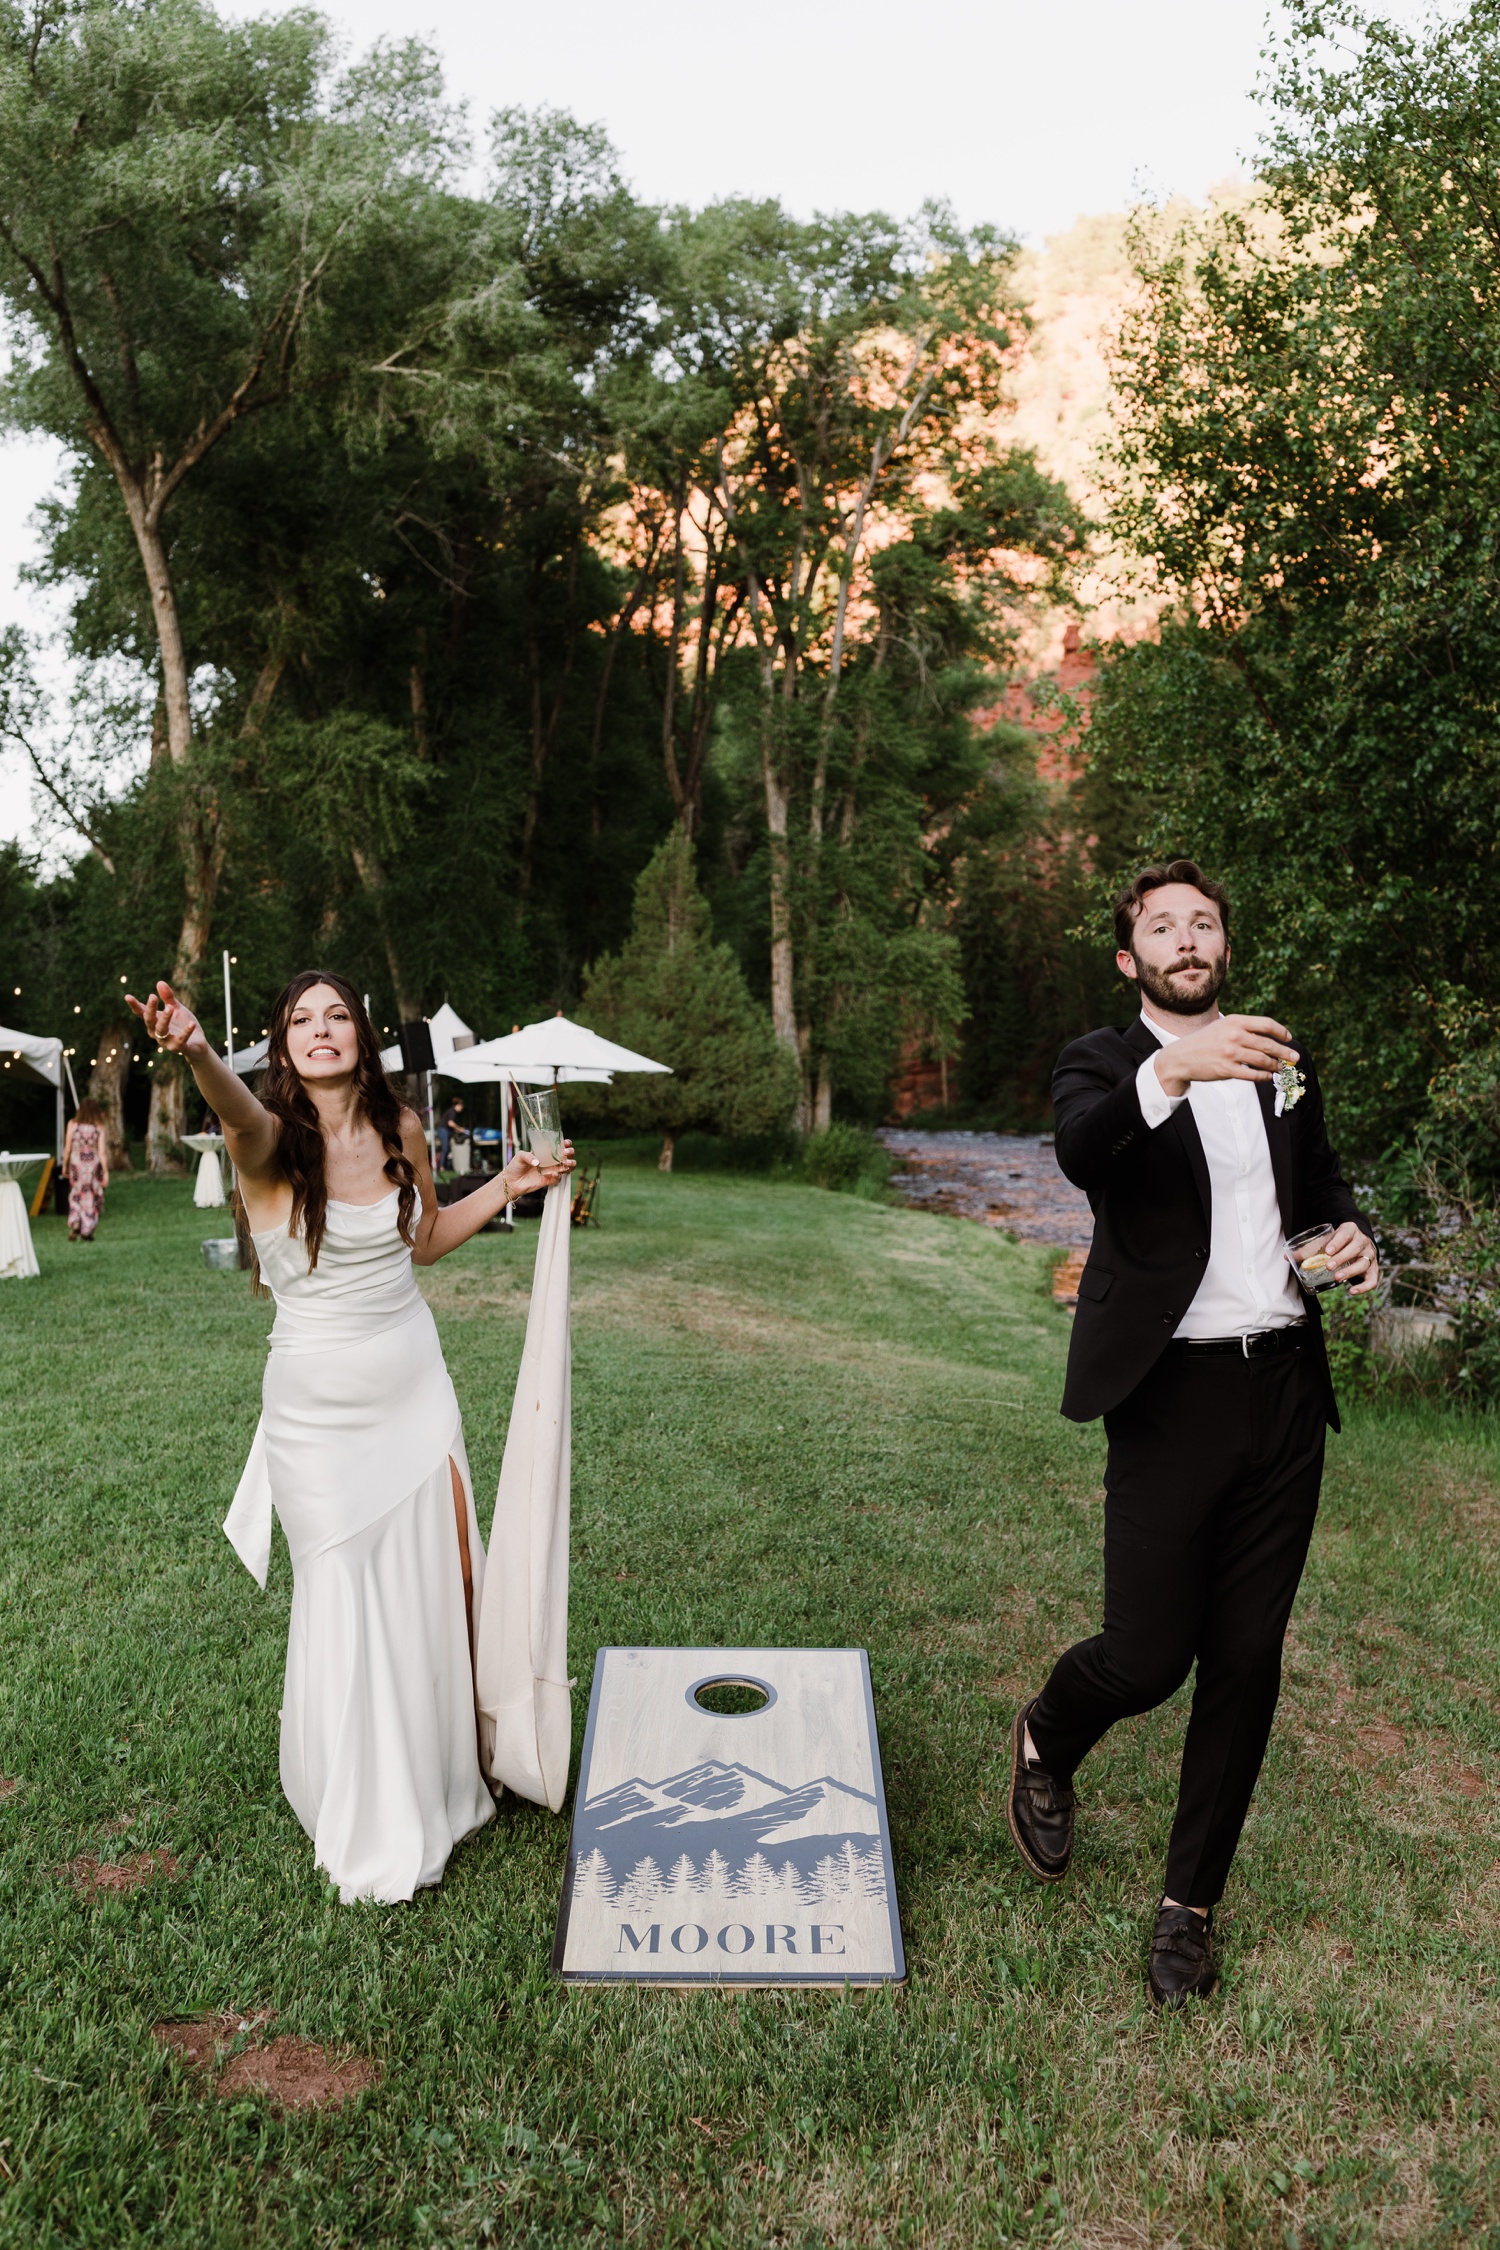 Bride and groom playing cornhole at an outdoor wedding